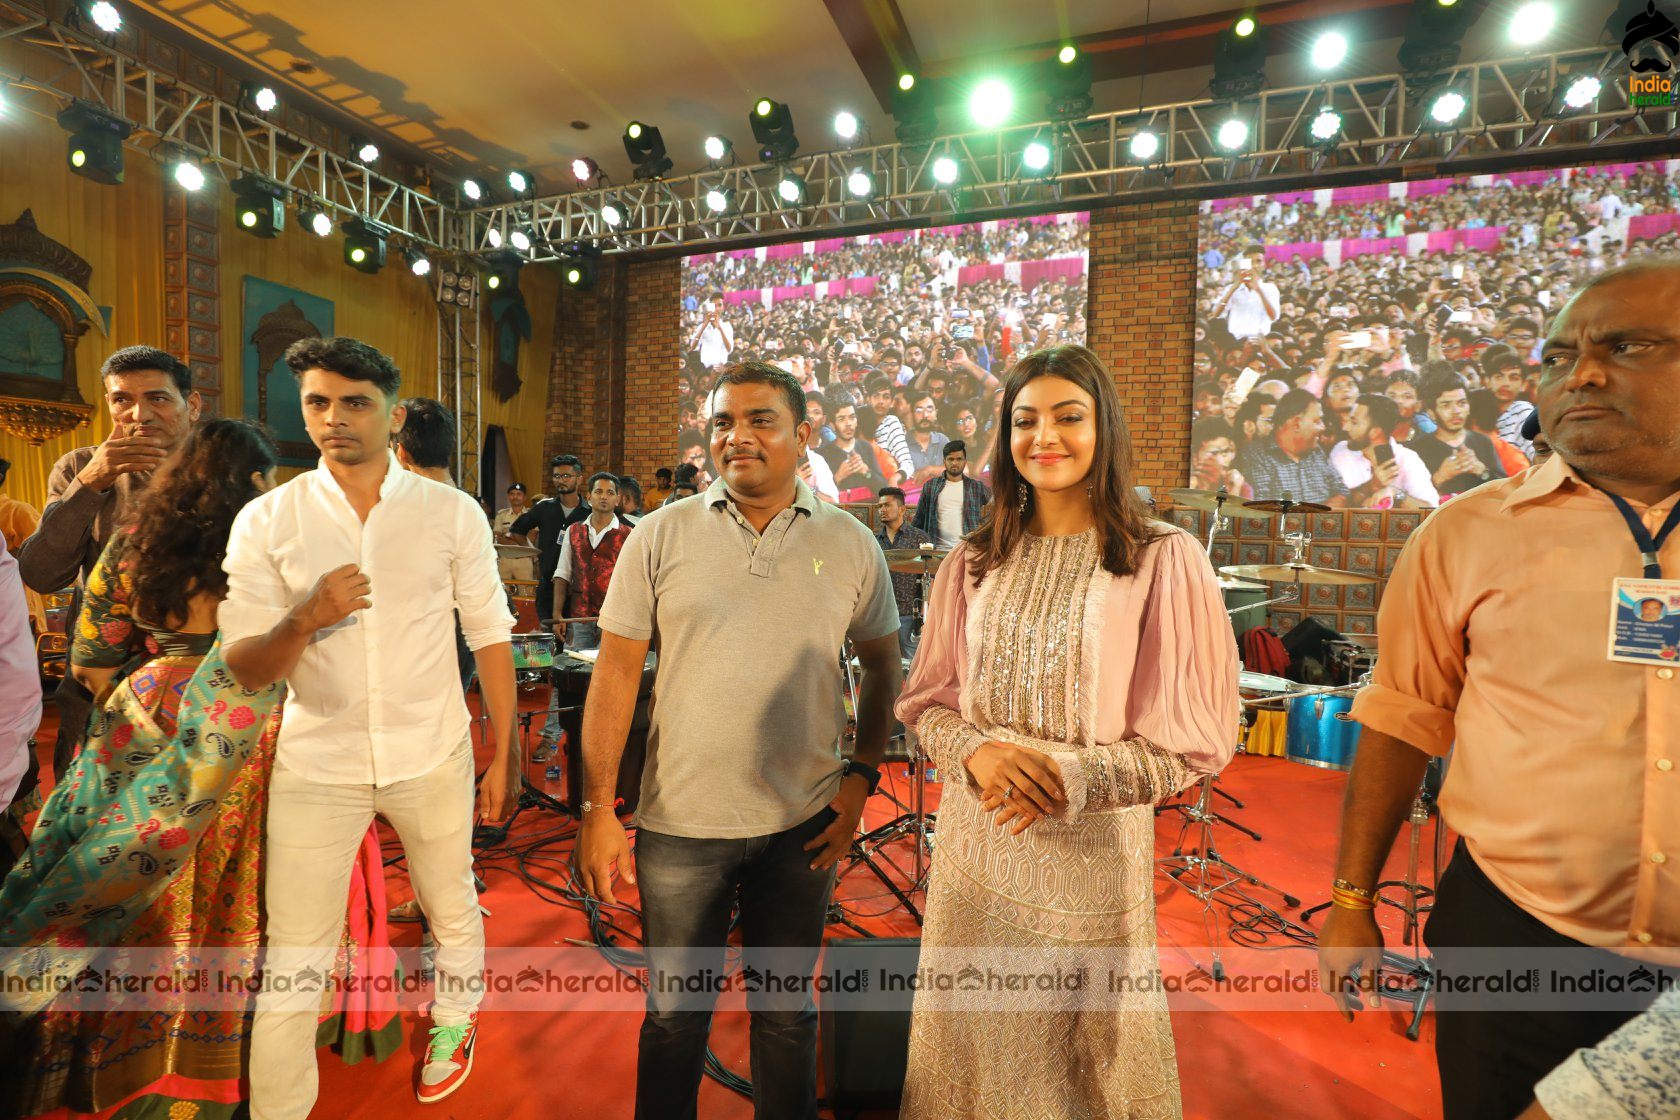 Kajal Aggarwal Surprise Visit at a Live Concert Show Event in Mumbai Set 6